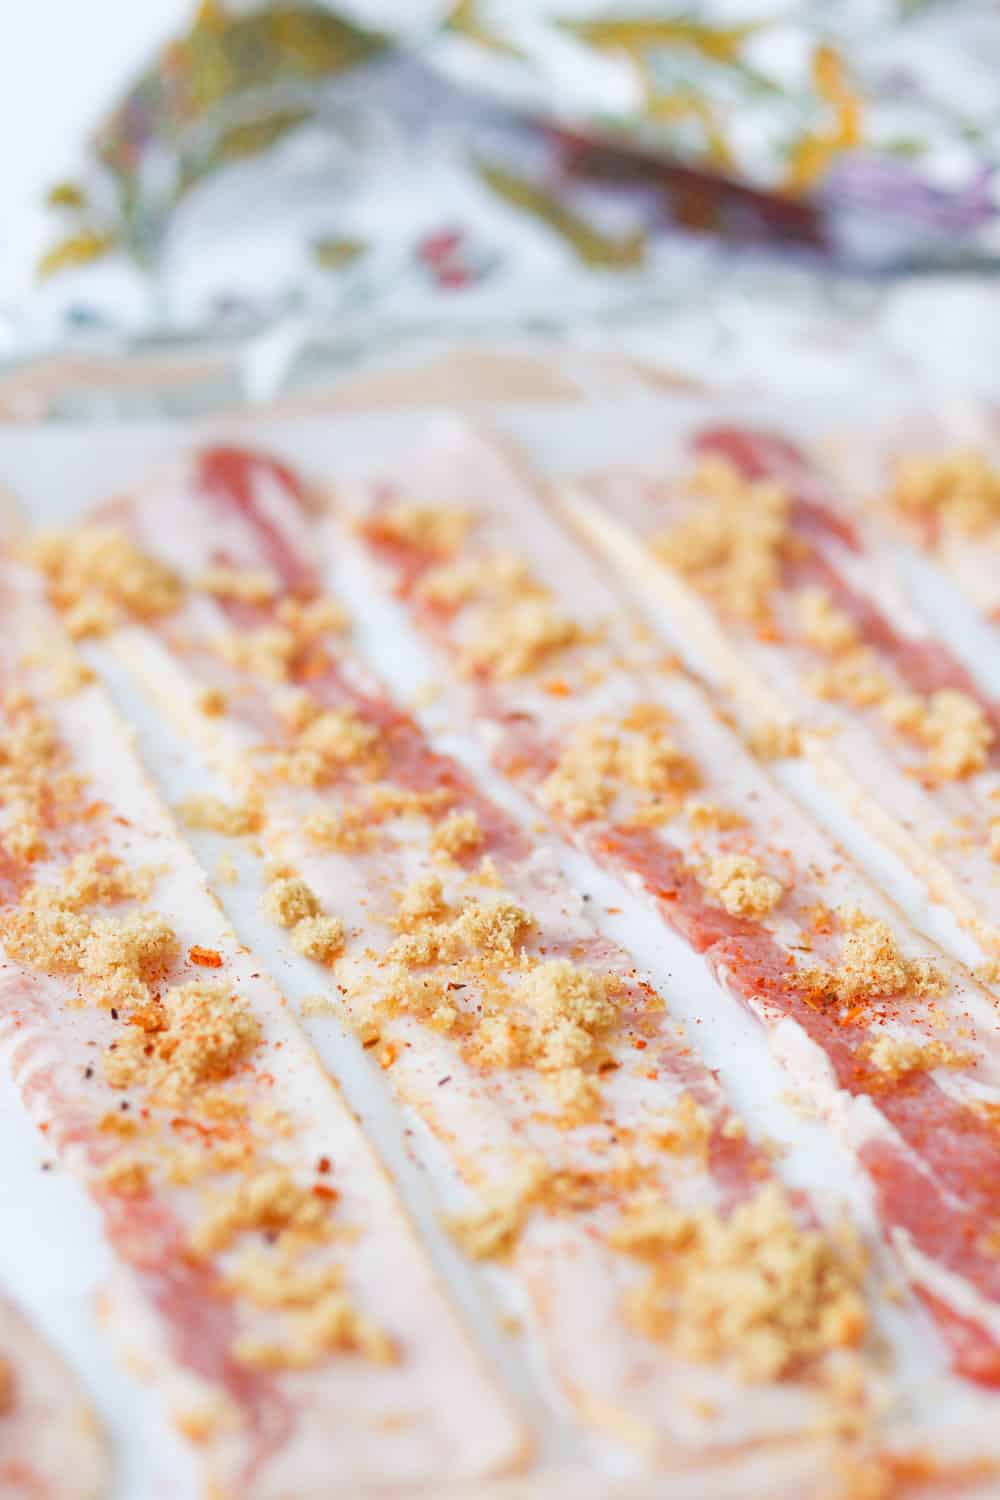 Bacon ready to be baked in the oven.